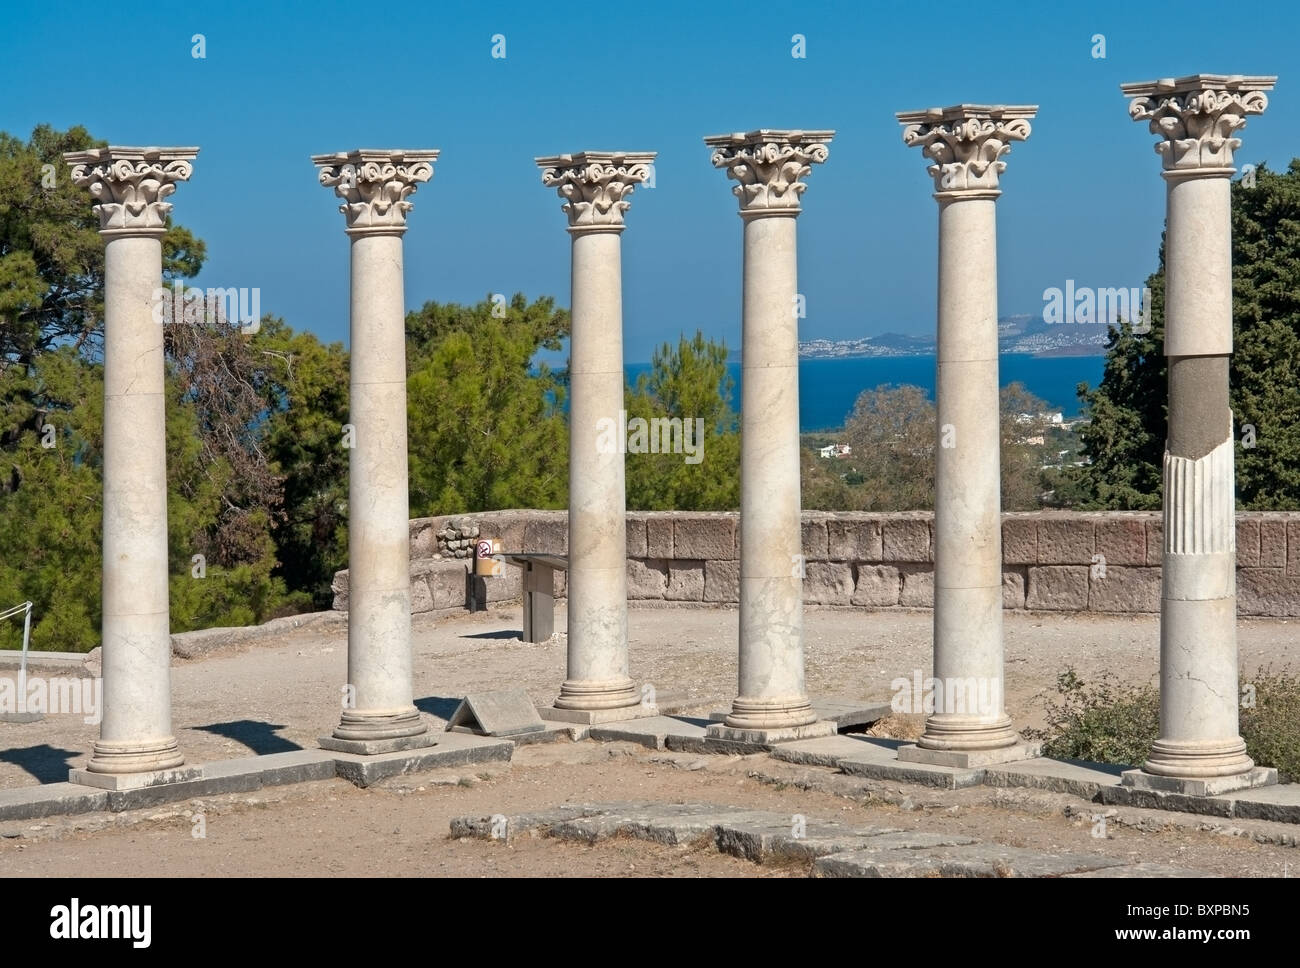 Corinthian columns at f the Asclepeion archaeological site on the island of Kos, Greece Stock Photo